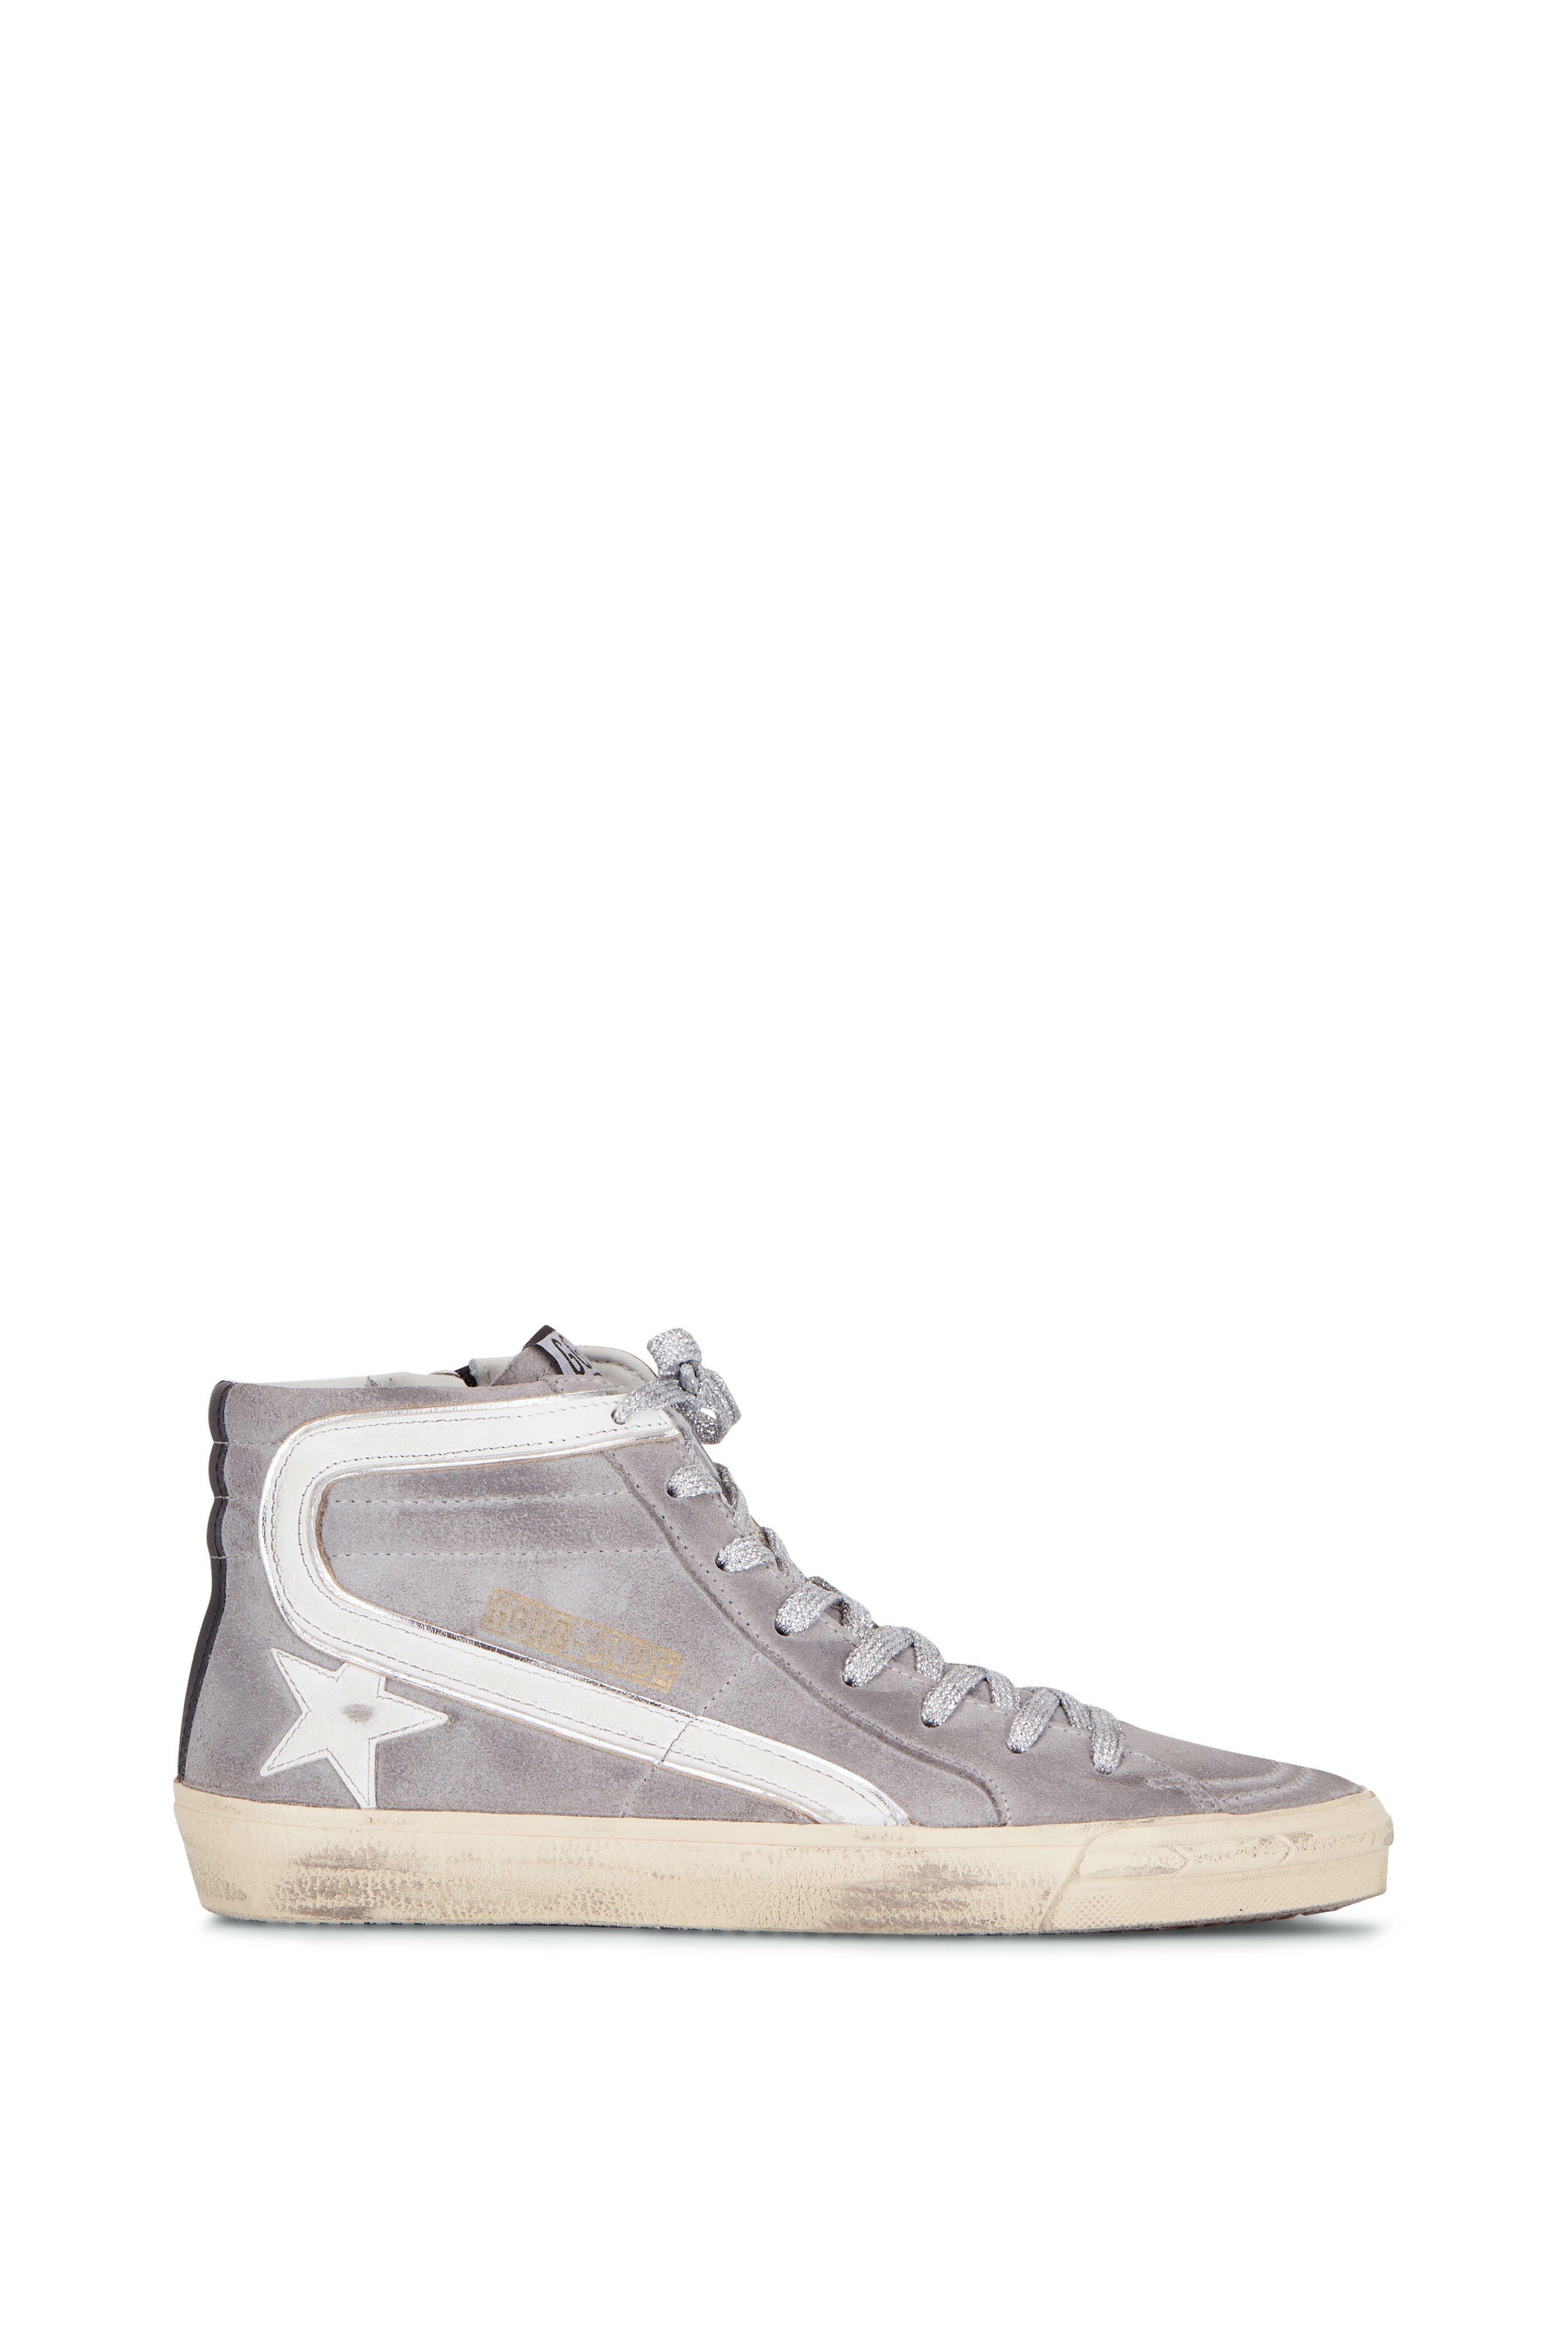 Golden Goose - Slide Gray Suede Silver Lace High Top Sneaker